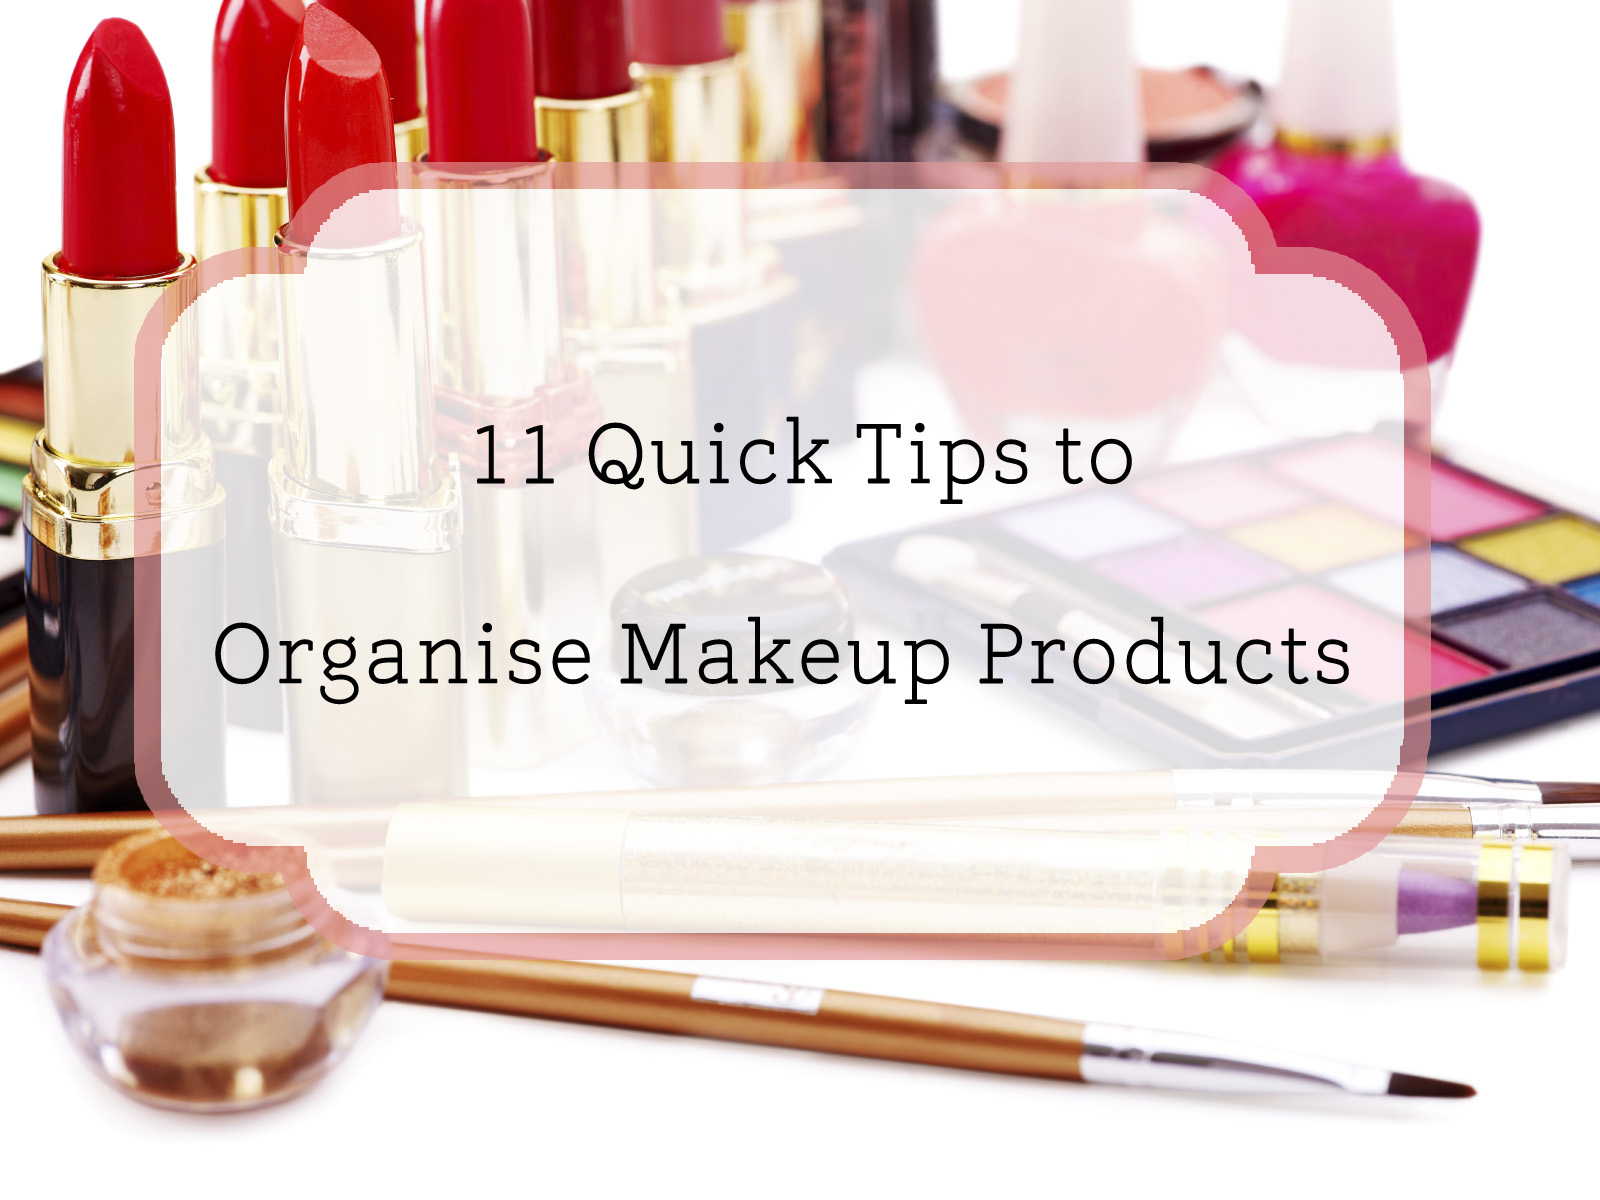 11 Quick Tips to Organise Makeup Products